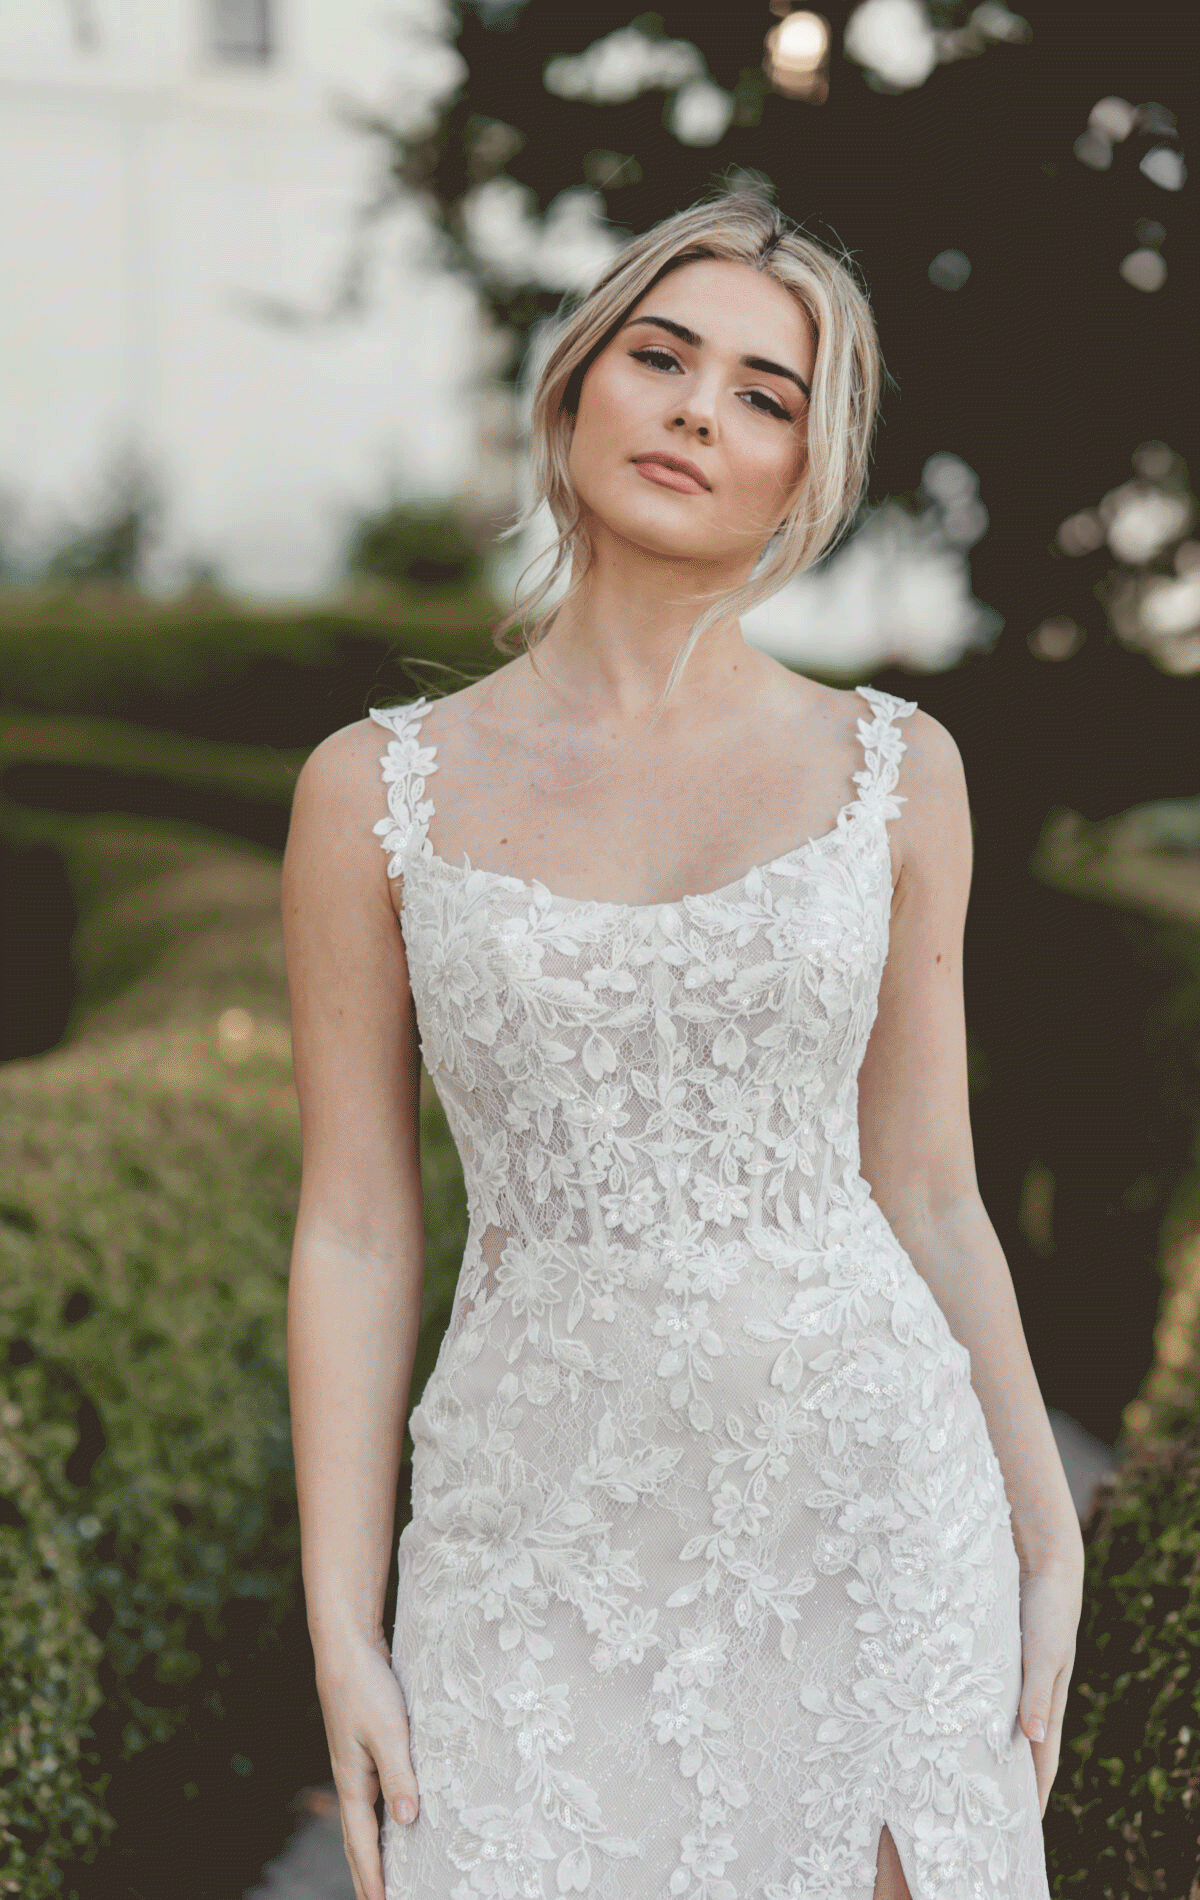 Leonie - 7941 - Stella York 7941, Beaded lace fit & flare wedding dress with scoop neckline and lace straps - Extensive collection of Stella York designs at Blessings Of Brighton, The Bridal Boutique 3 Loyal Parade, Mill Rise, Westdene, Brighton E.Sussex BN1 5GG